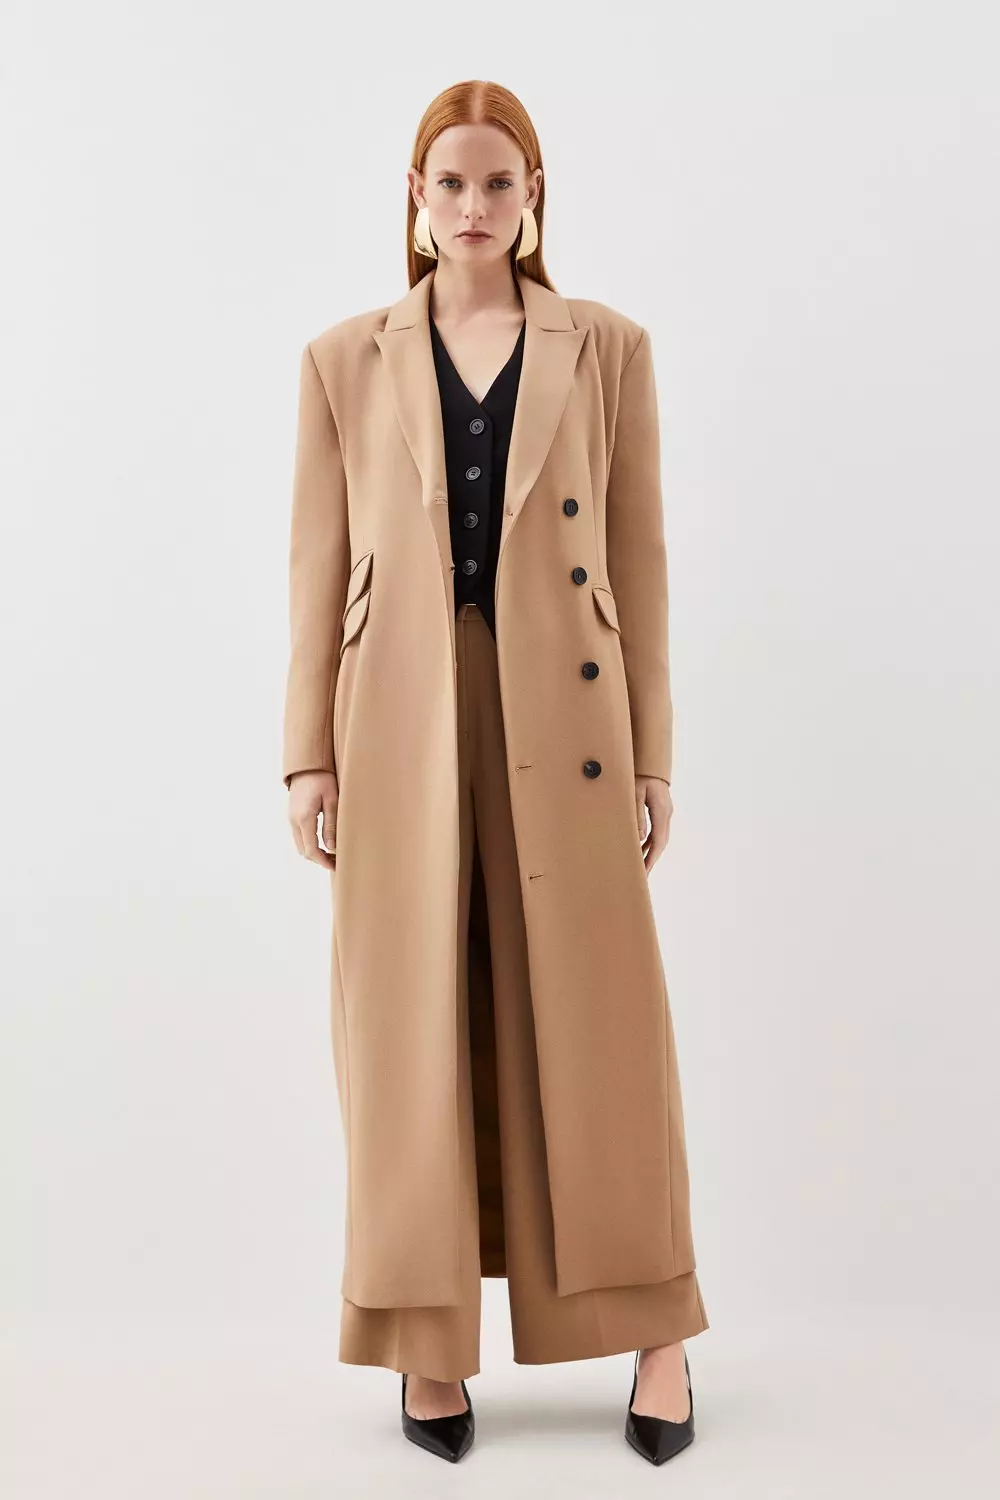 Beige Duster Coat with Leather Pants Outfits For Women (4 ideas